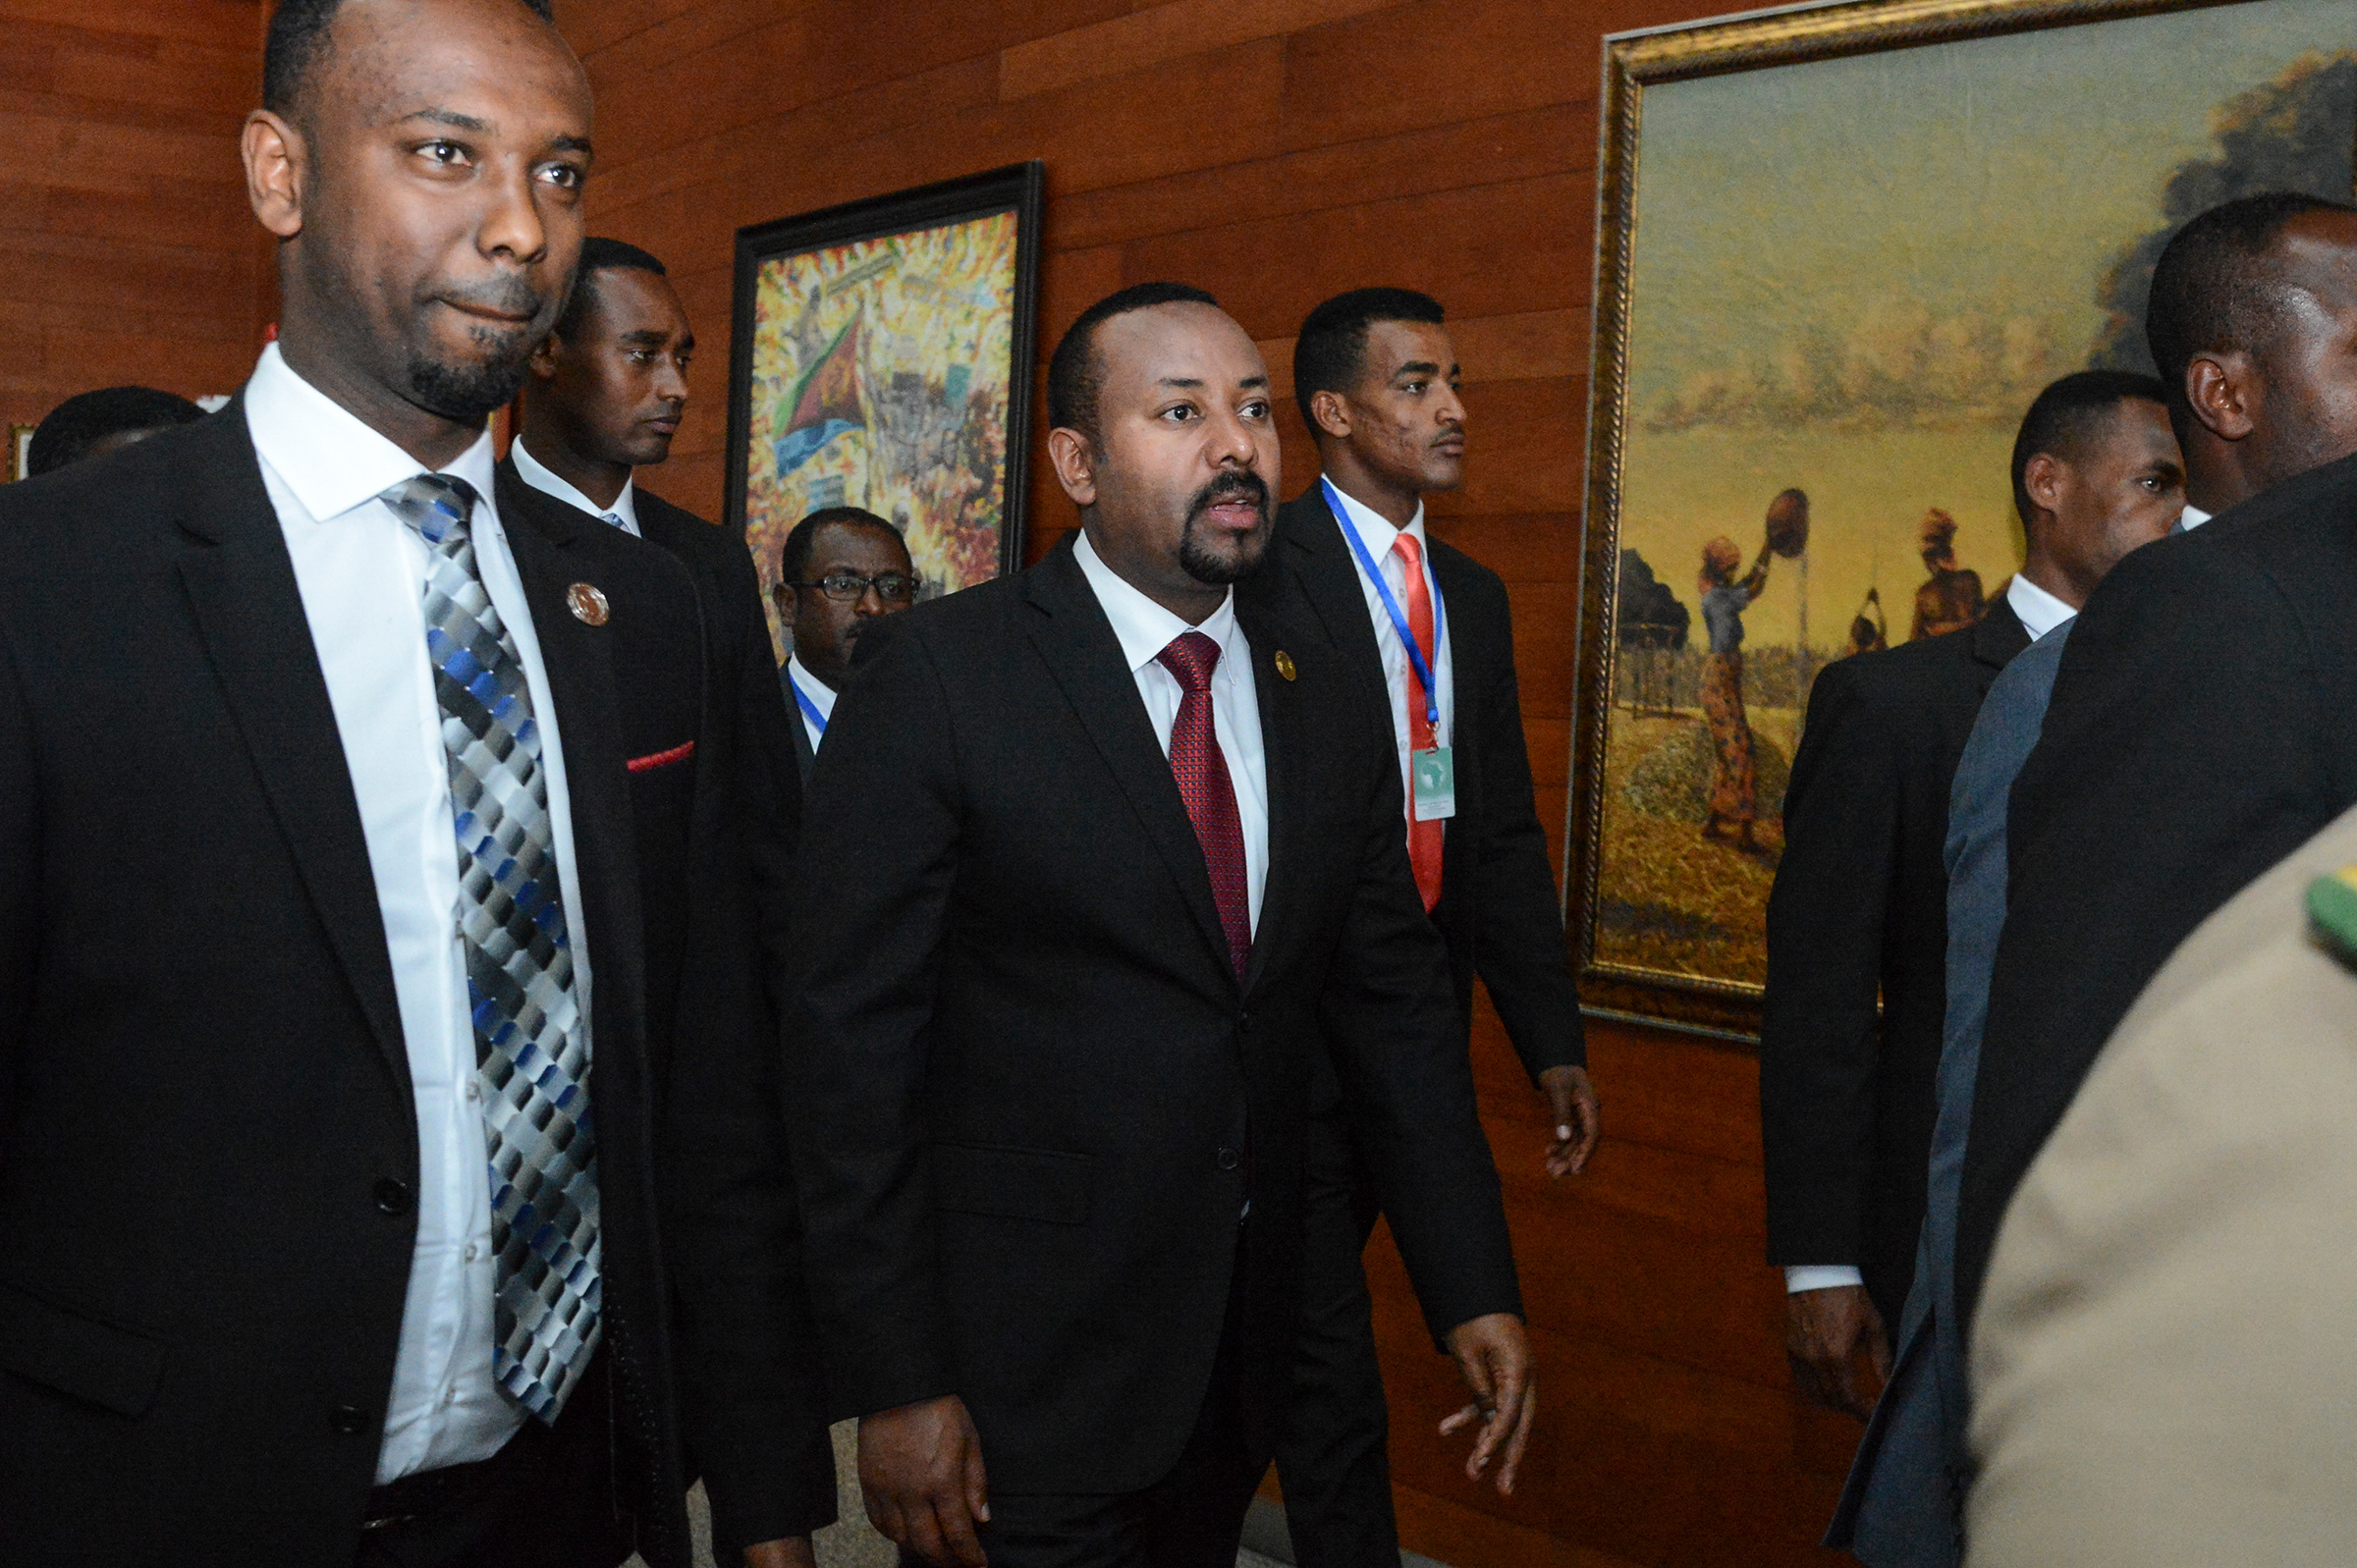 Ethiopia's Prime Minister Abiy Ahmed, center, arrives for the opening session of the 33rd African Union Summit in Addis Ababa on Feb. 9 (AP)